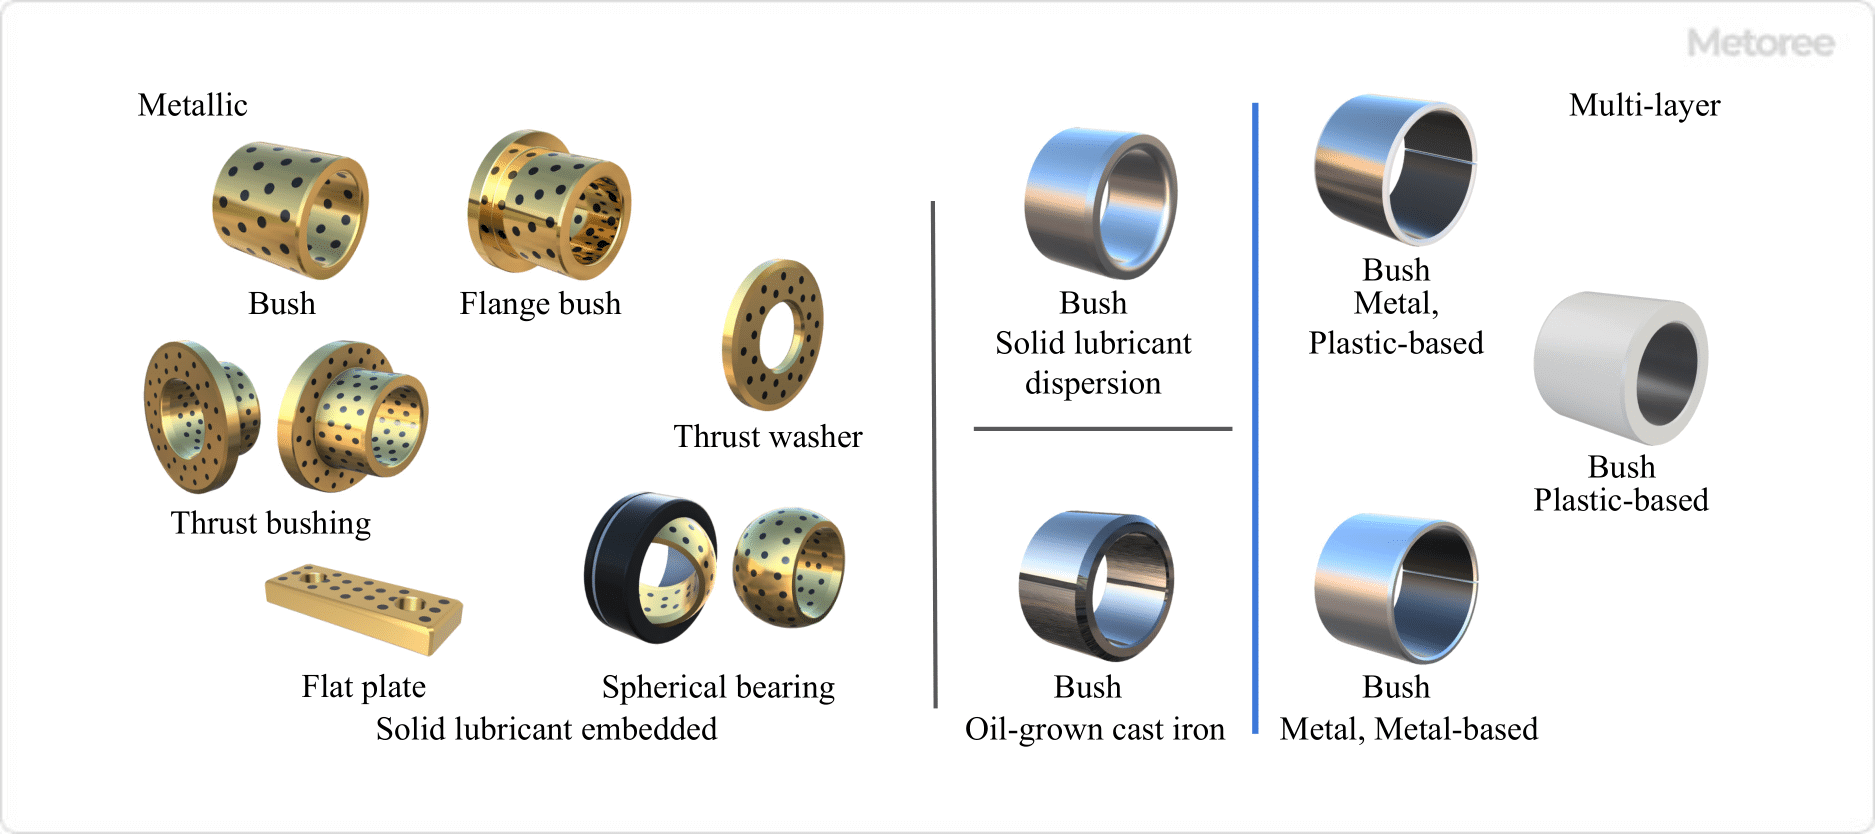 Figure 3. Types by material (Metallic)